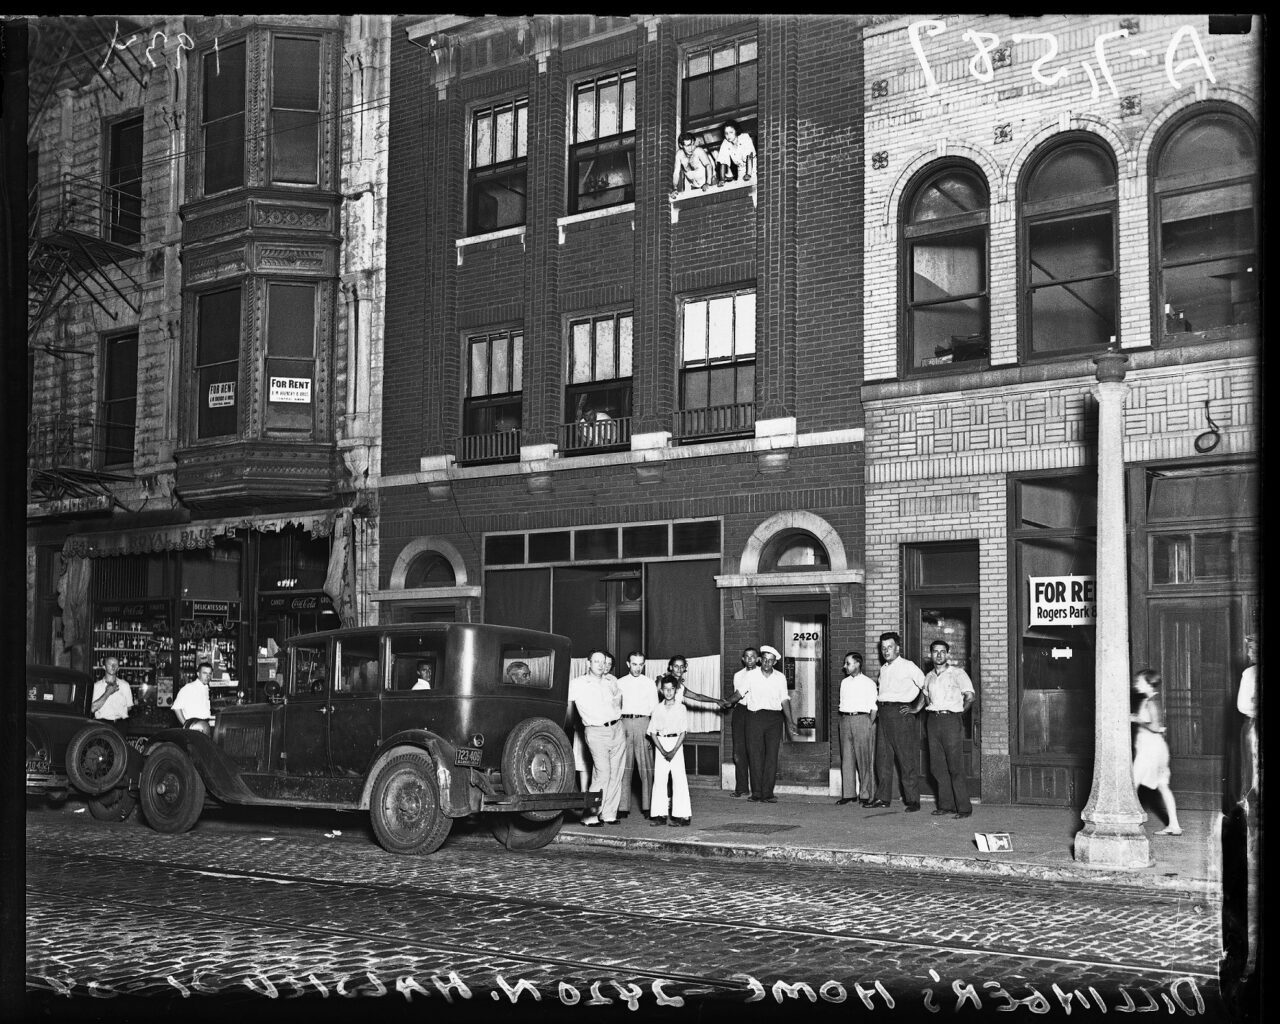 Home of John Dillinger at 2420 North Halsted Street, Chicago, Illinois, 1934.